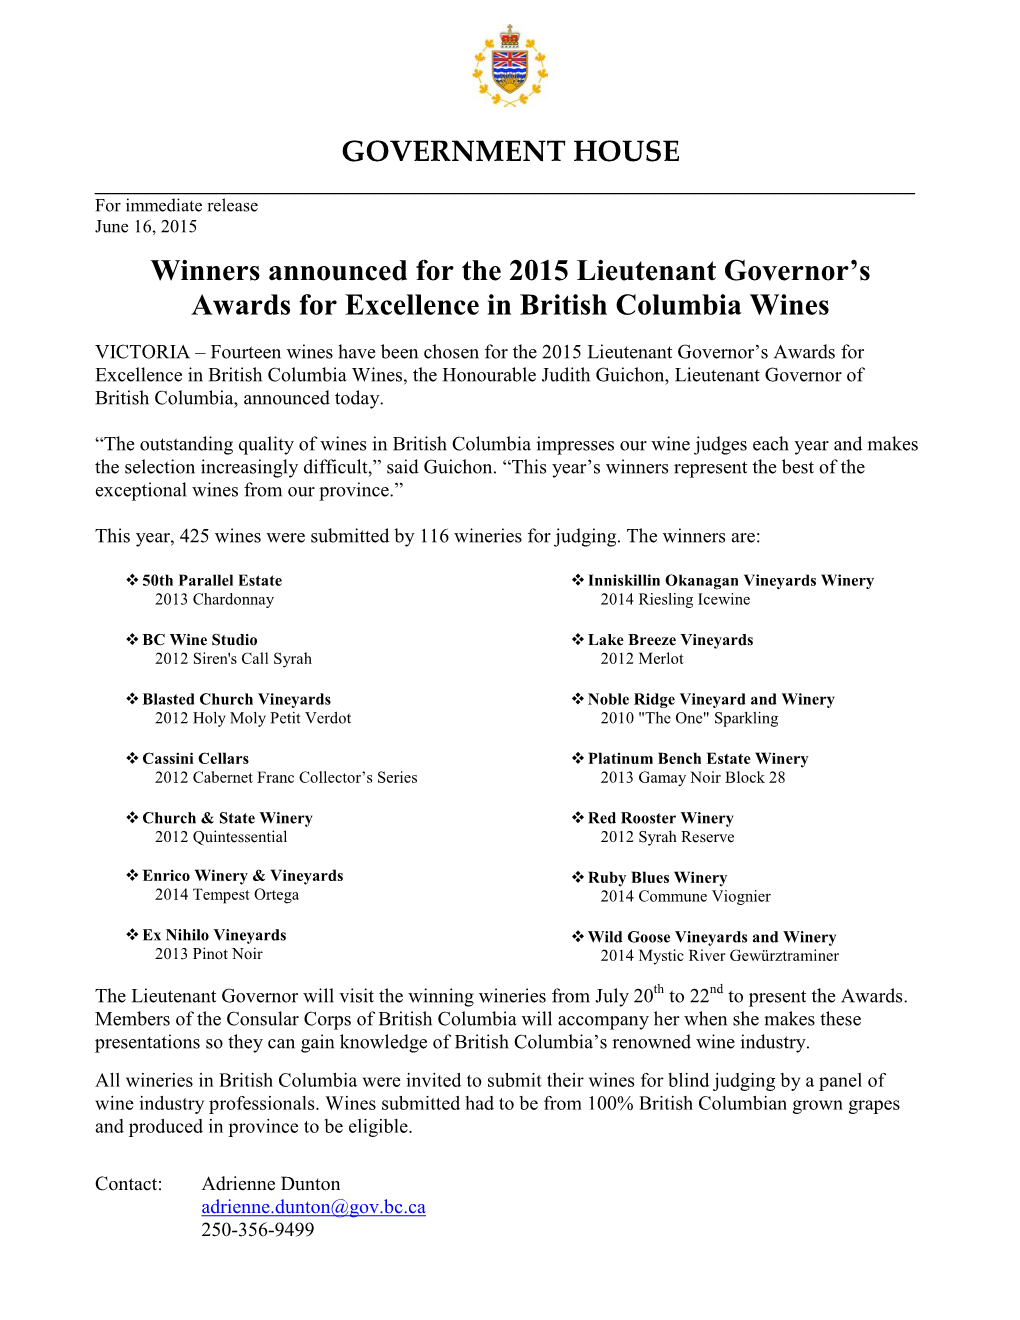 Winners Announced for the 2015 Lieutenant Governor's Awards for Excellence in British Columbia Wines